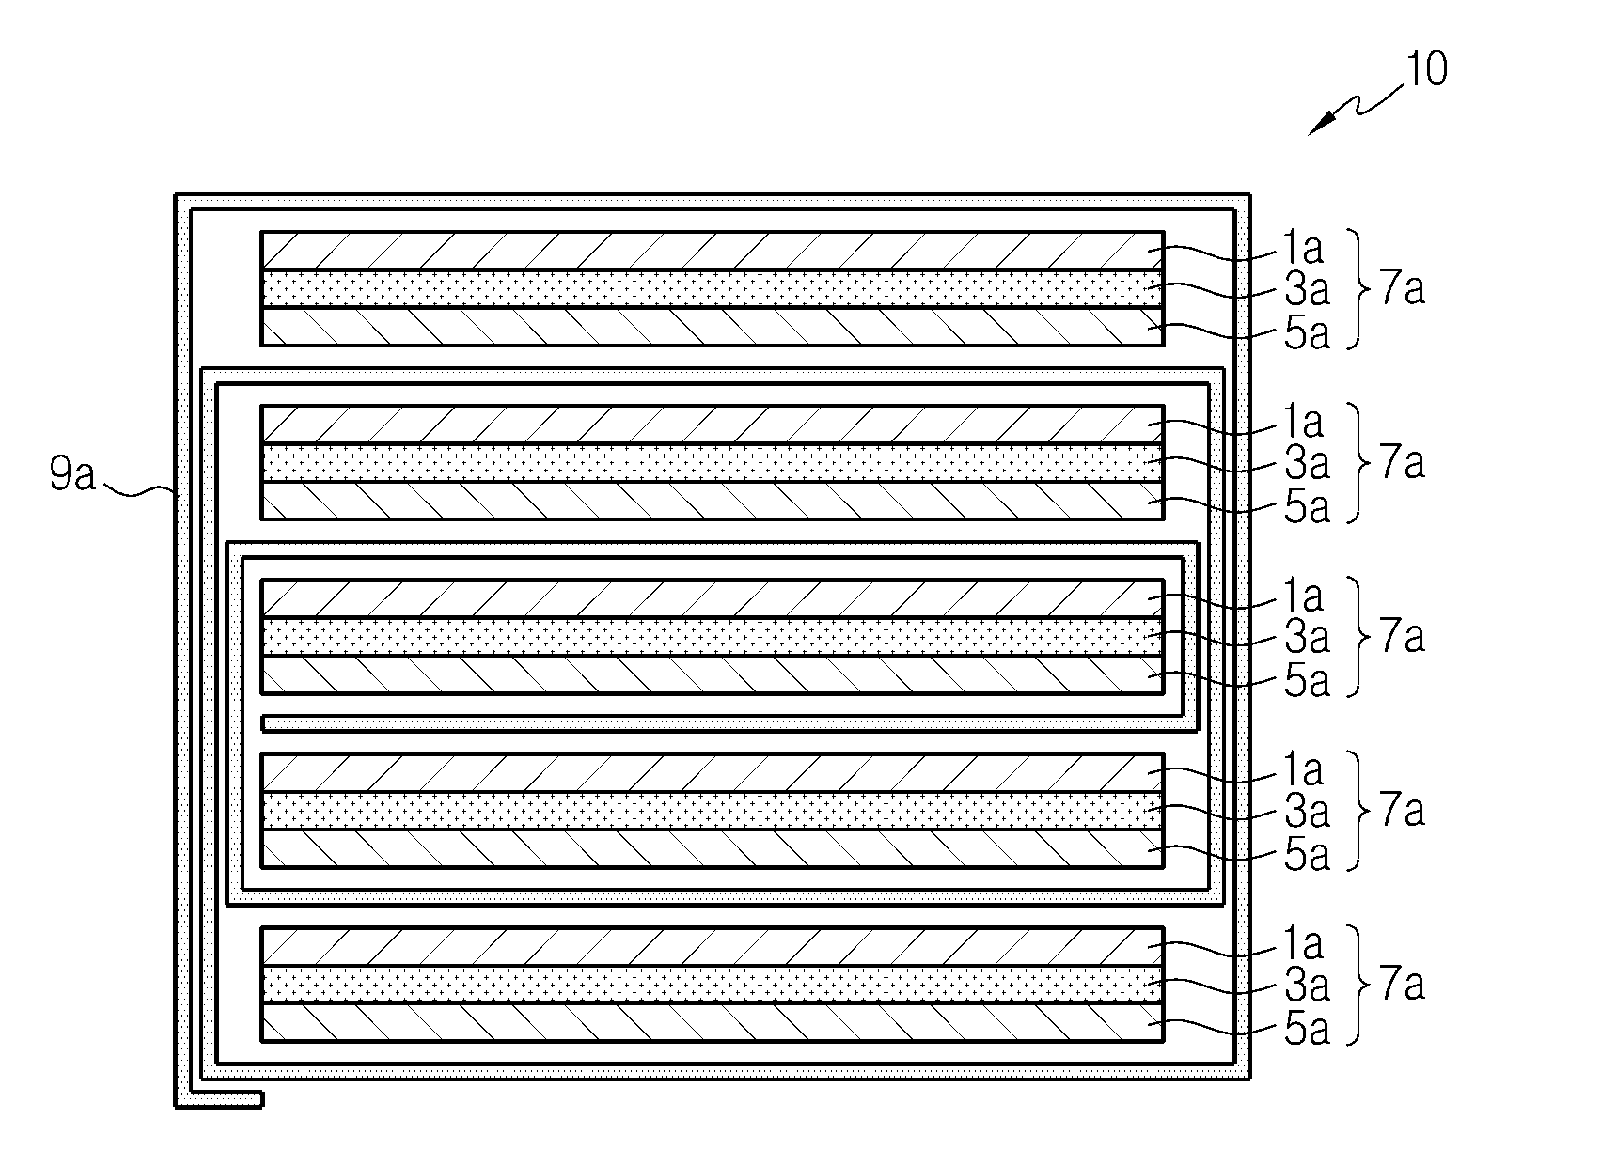 Electrochemical device having different kinds of separators